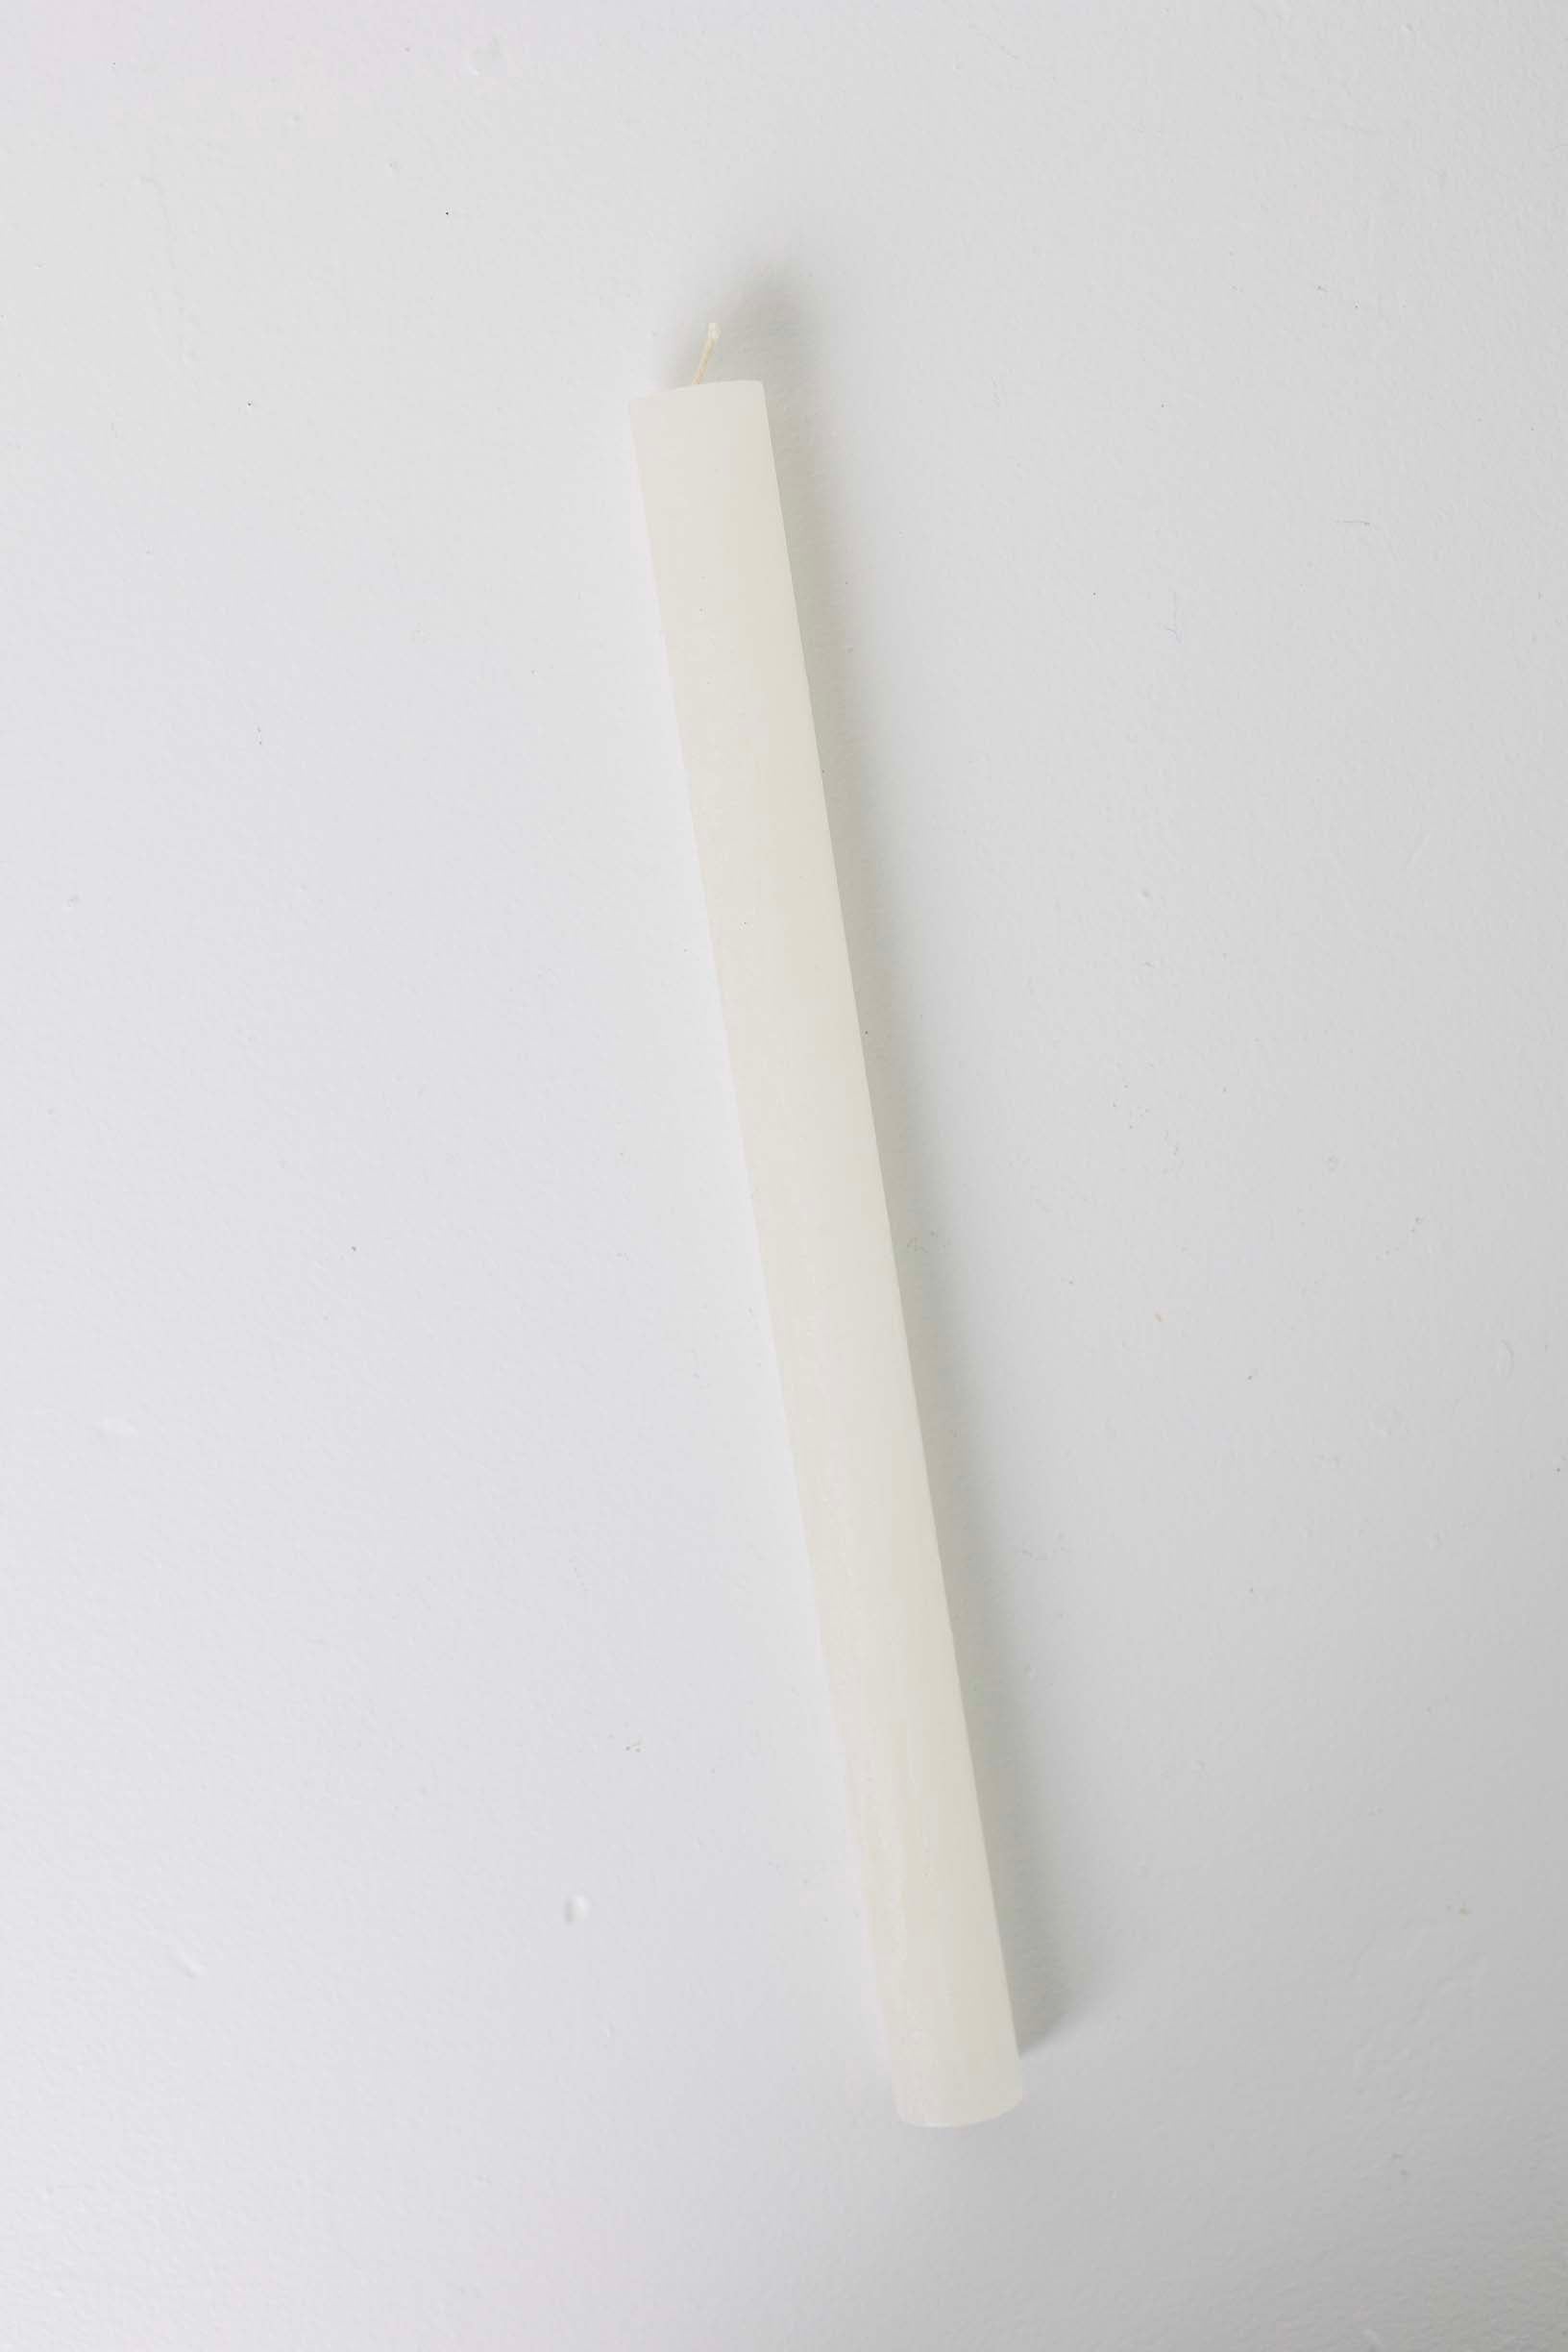 Spark Taper Candle - Ivory